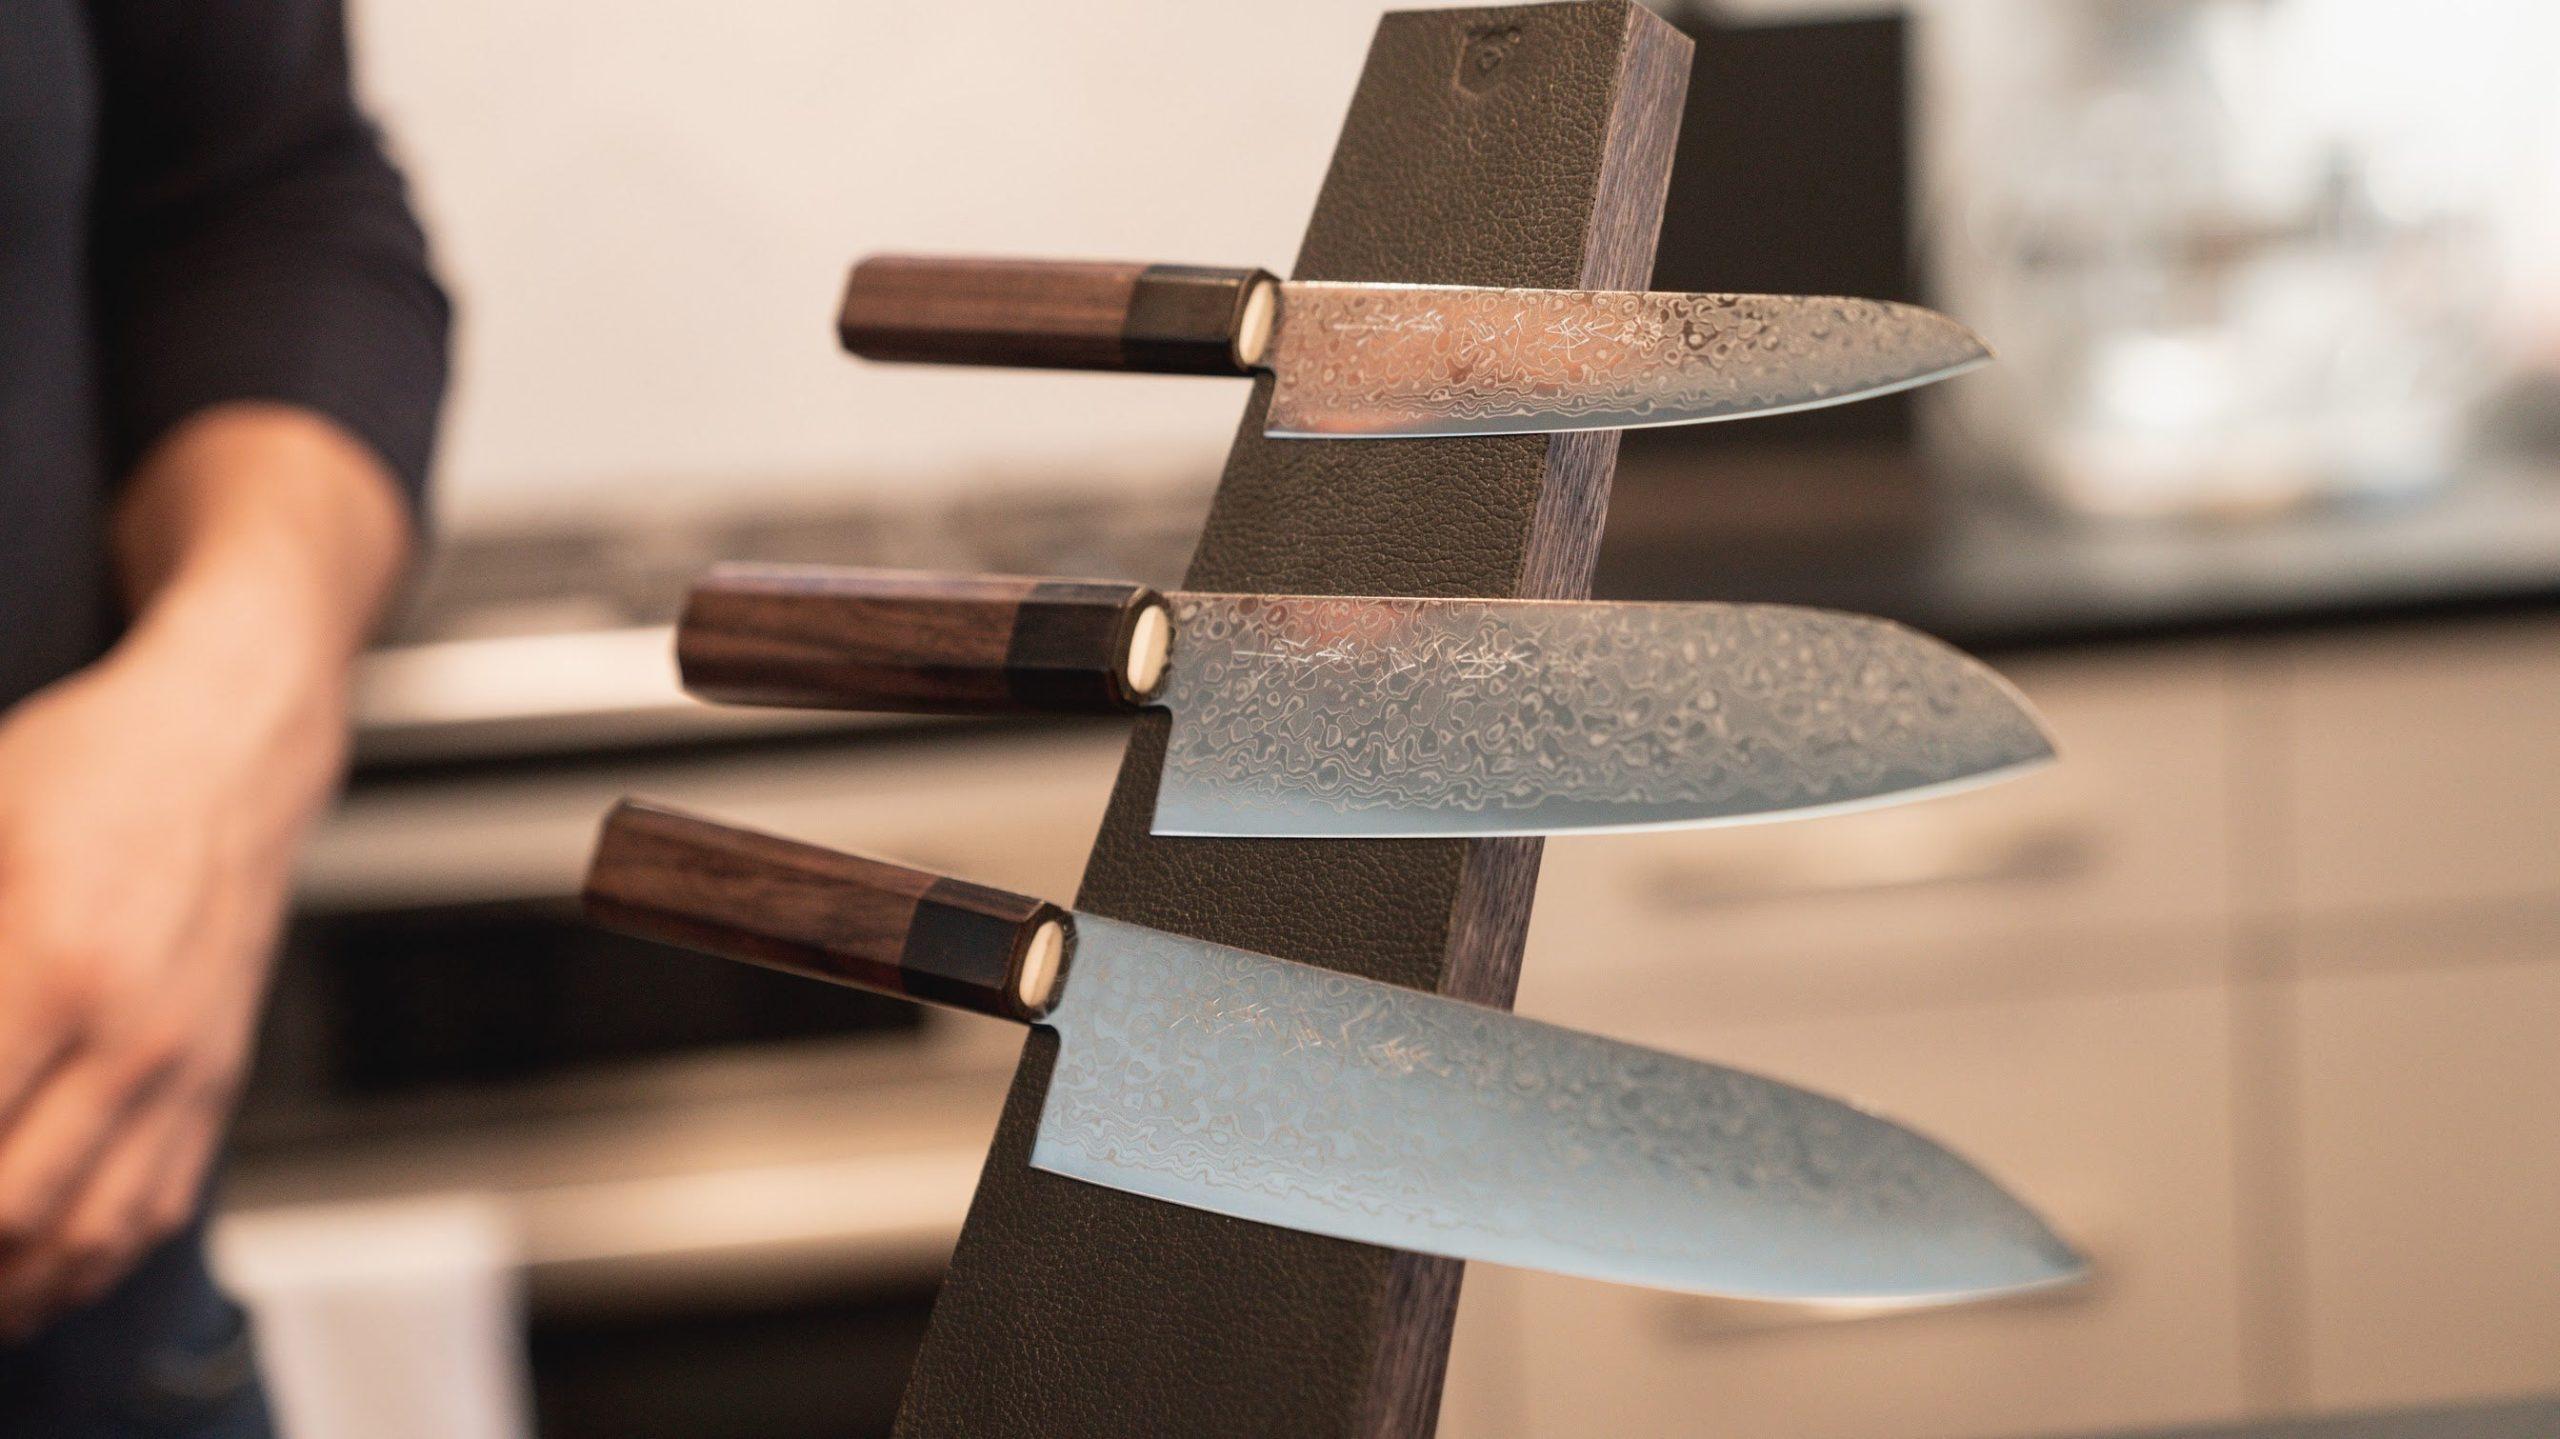 The Essential Kitchen Knives: What Every Home Chef Needs.